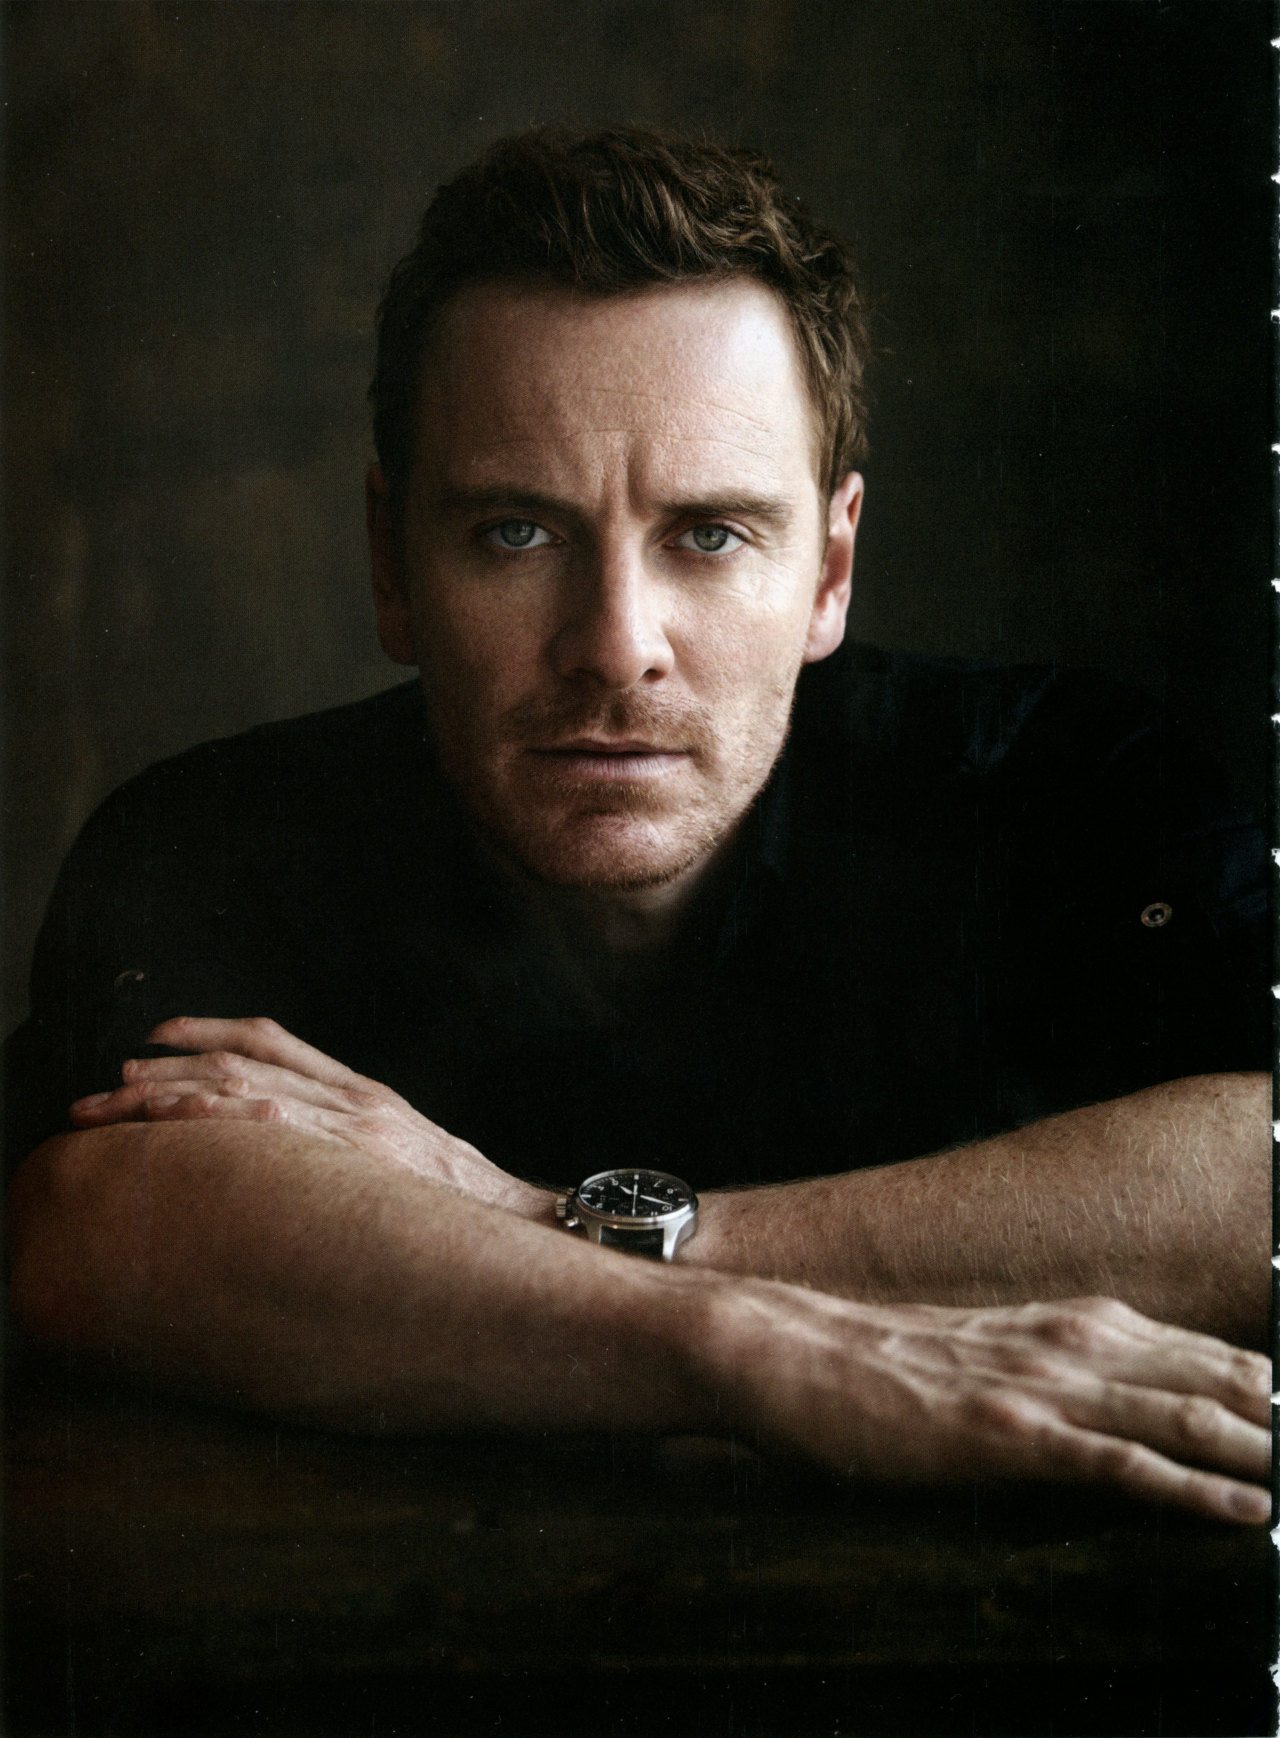 Fassy Time — Starringroles Michael Fassbender Photoshoots 50 